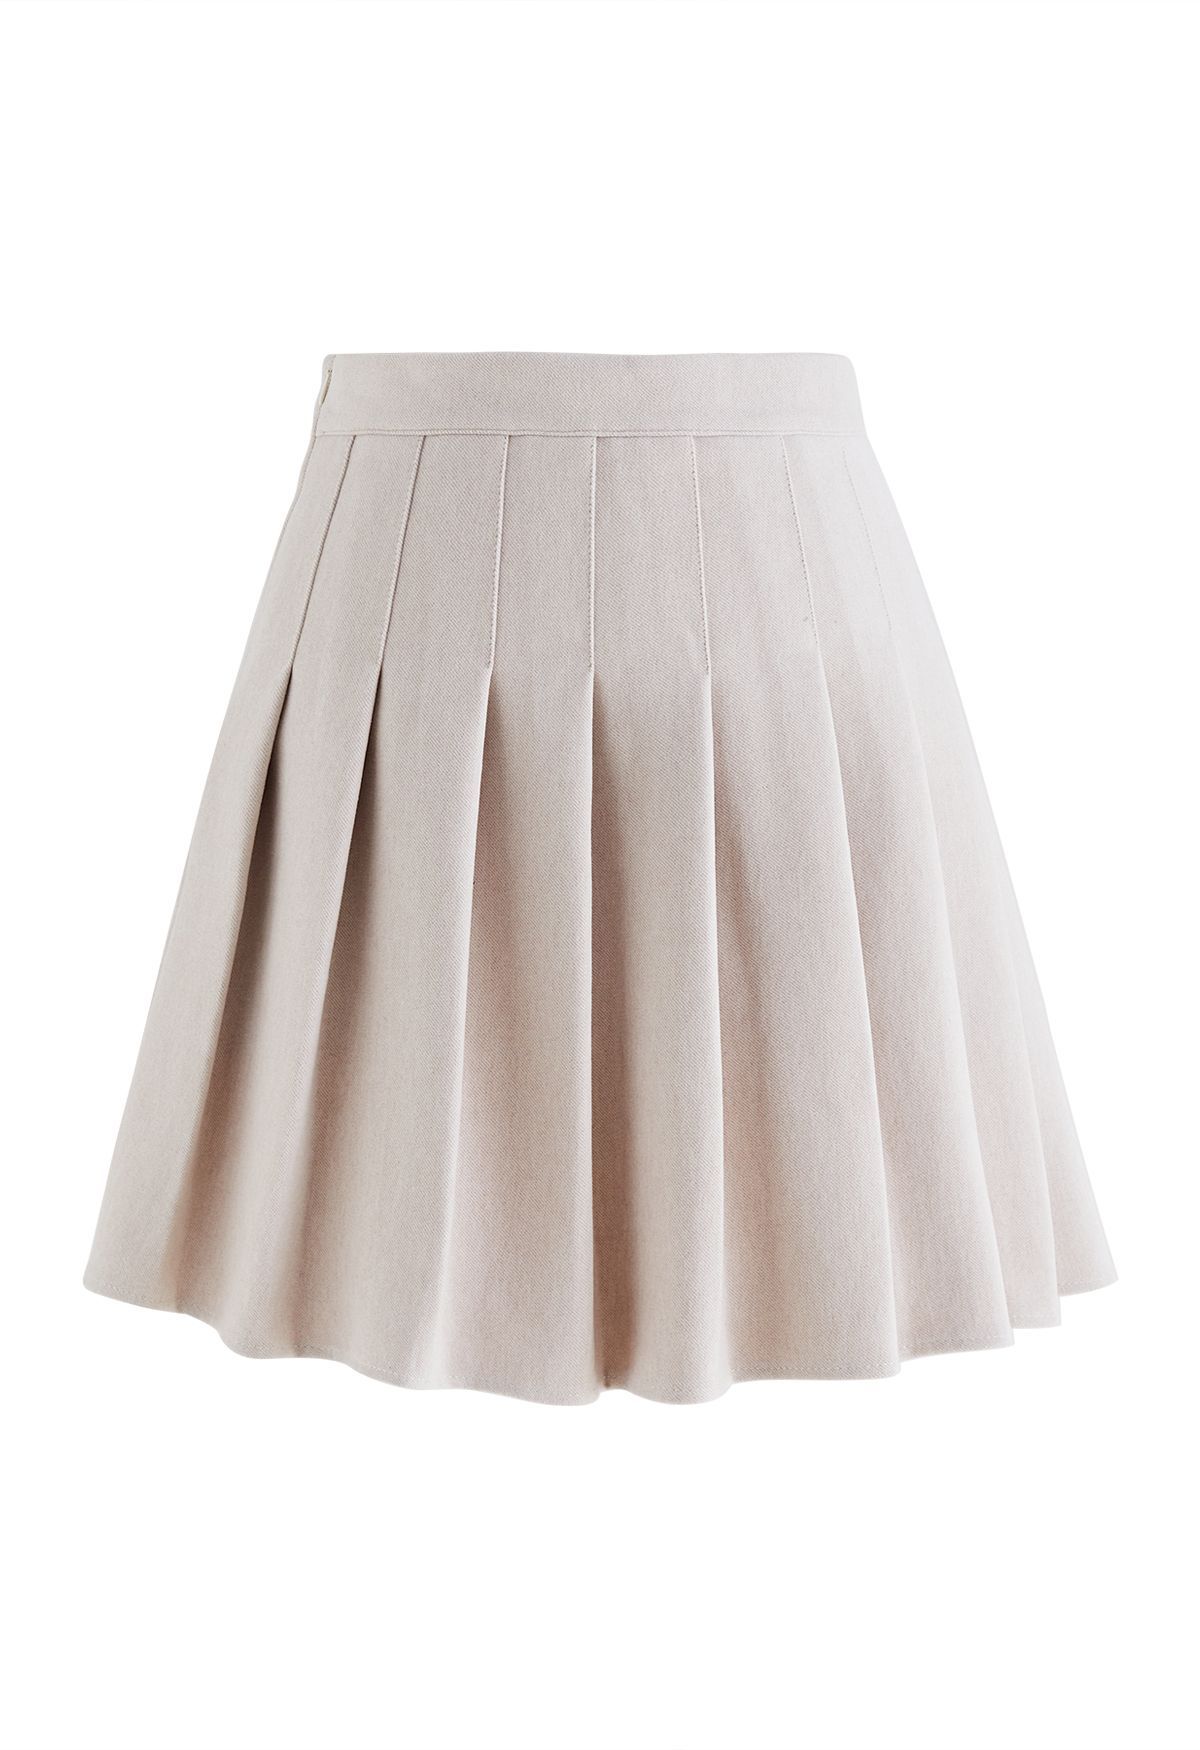 High Waist Wool-Blend Pleated Skater Skirt in Ivory | Chicwish